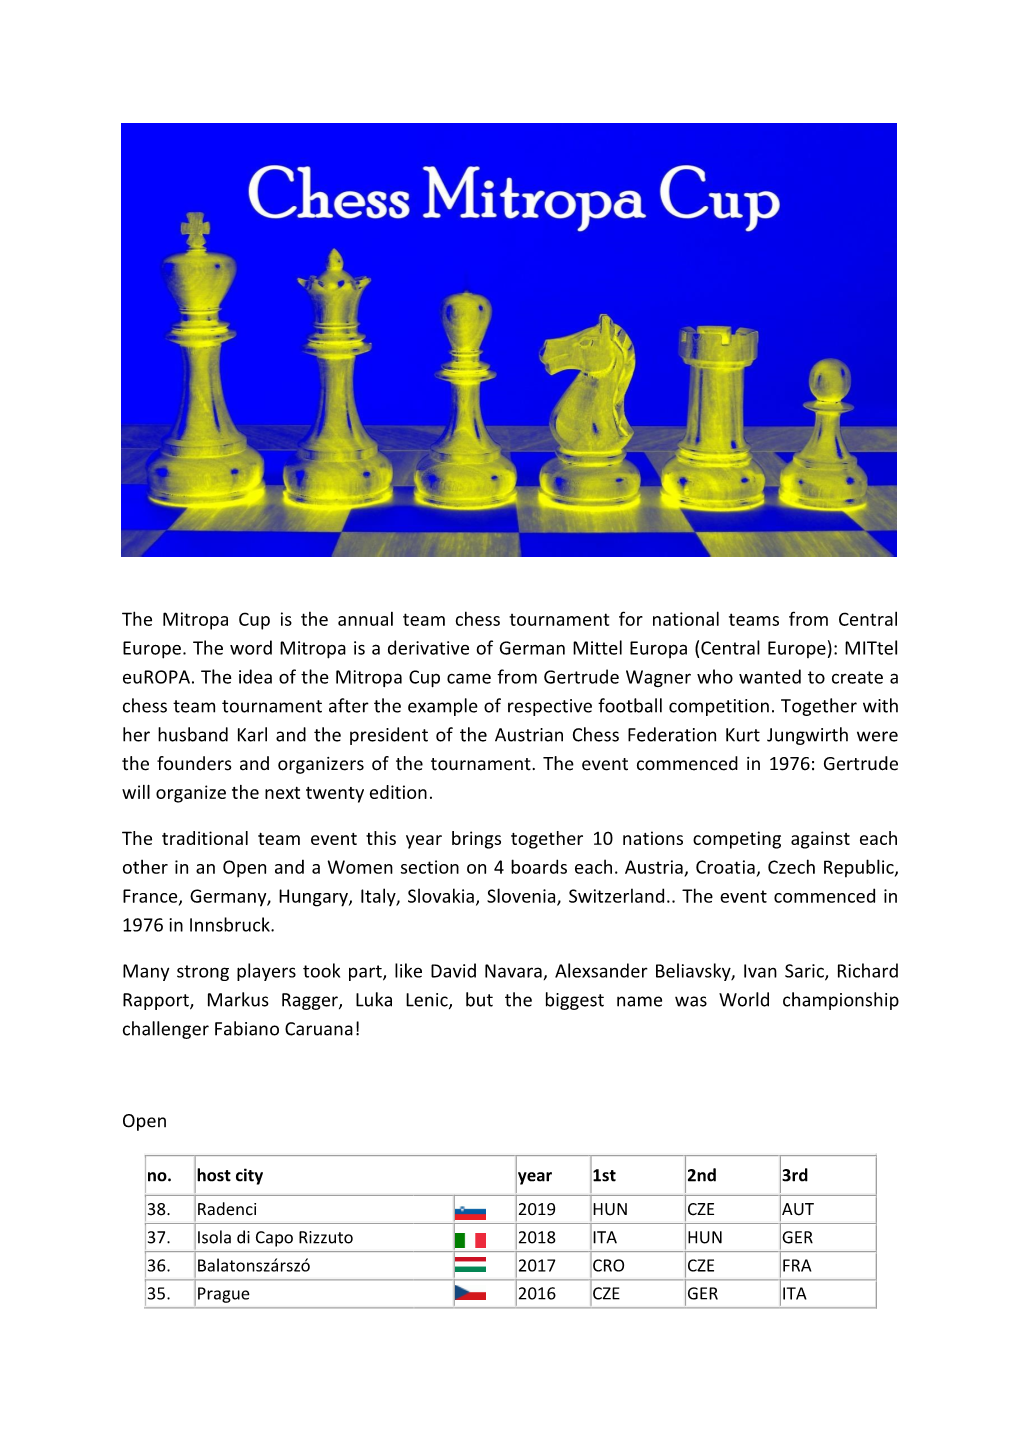 The Mitropa Cup Is the Annual Team Chess Tournament for National Teams from Central Europe